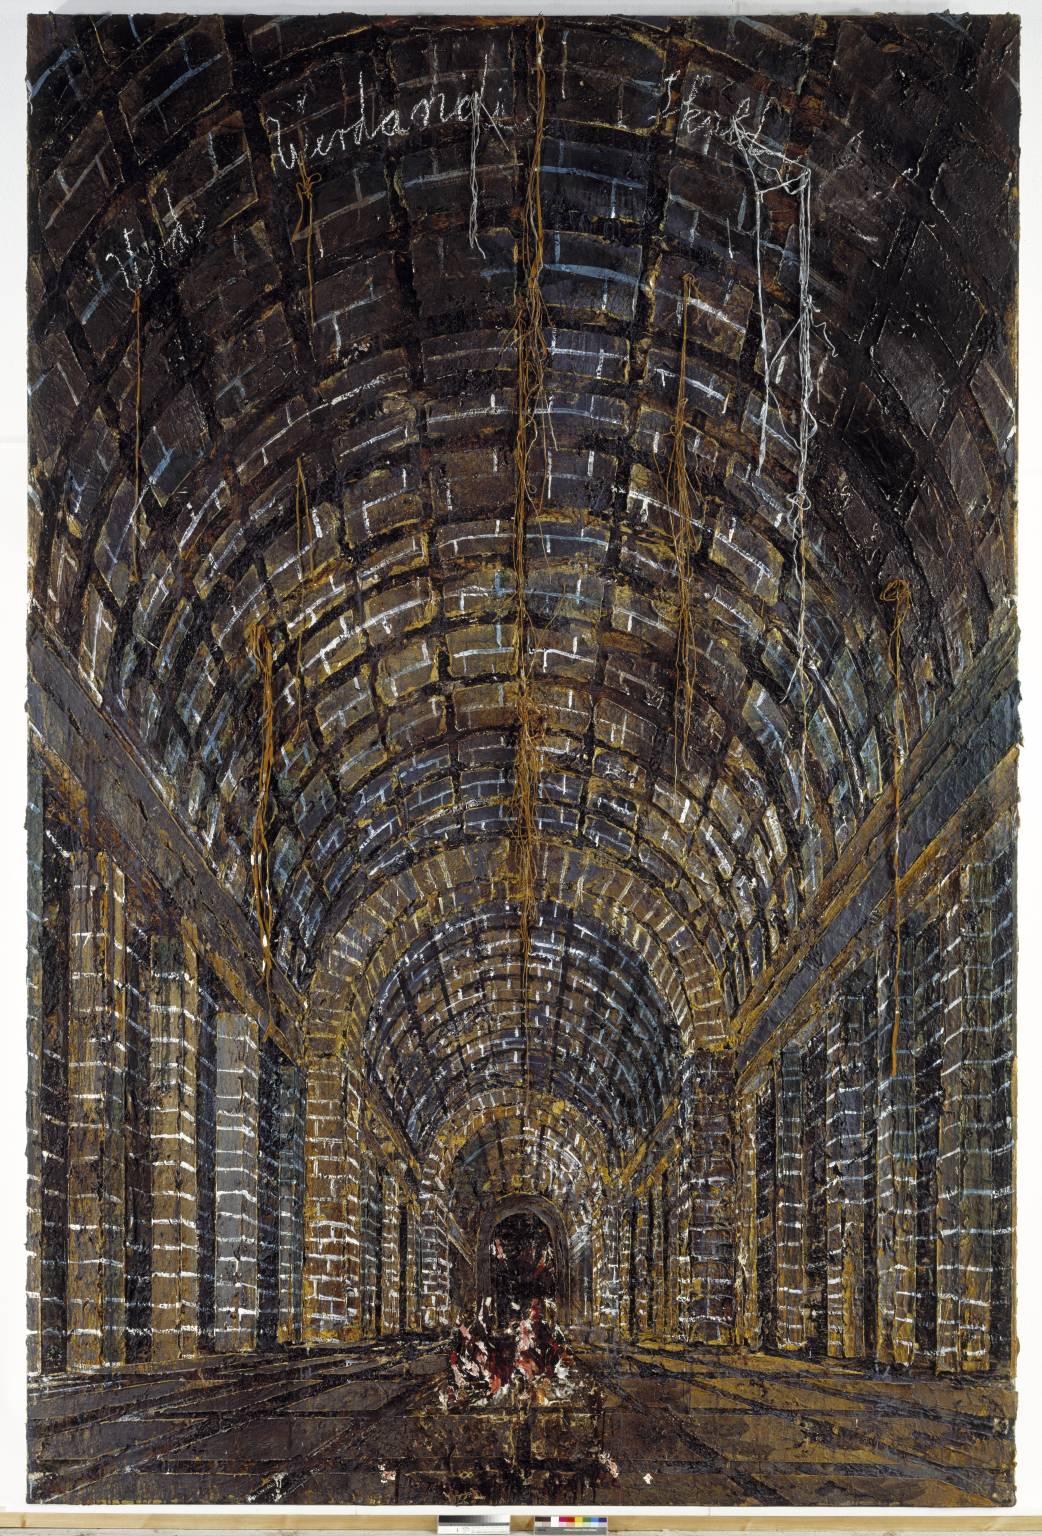 ANSELM KIEFER THE NORMS 1983